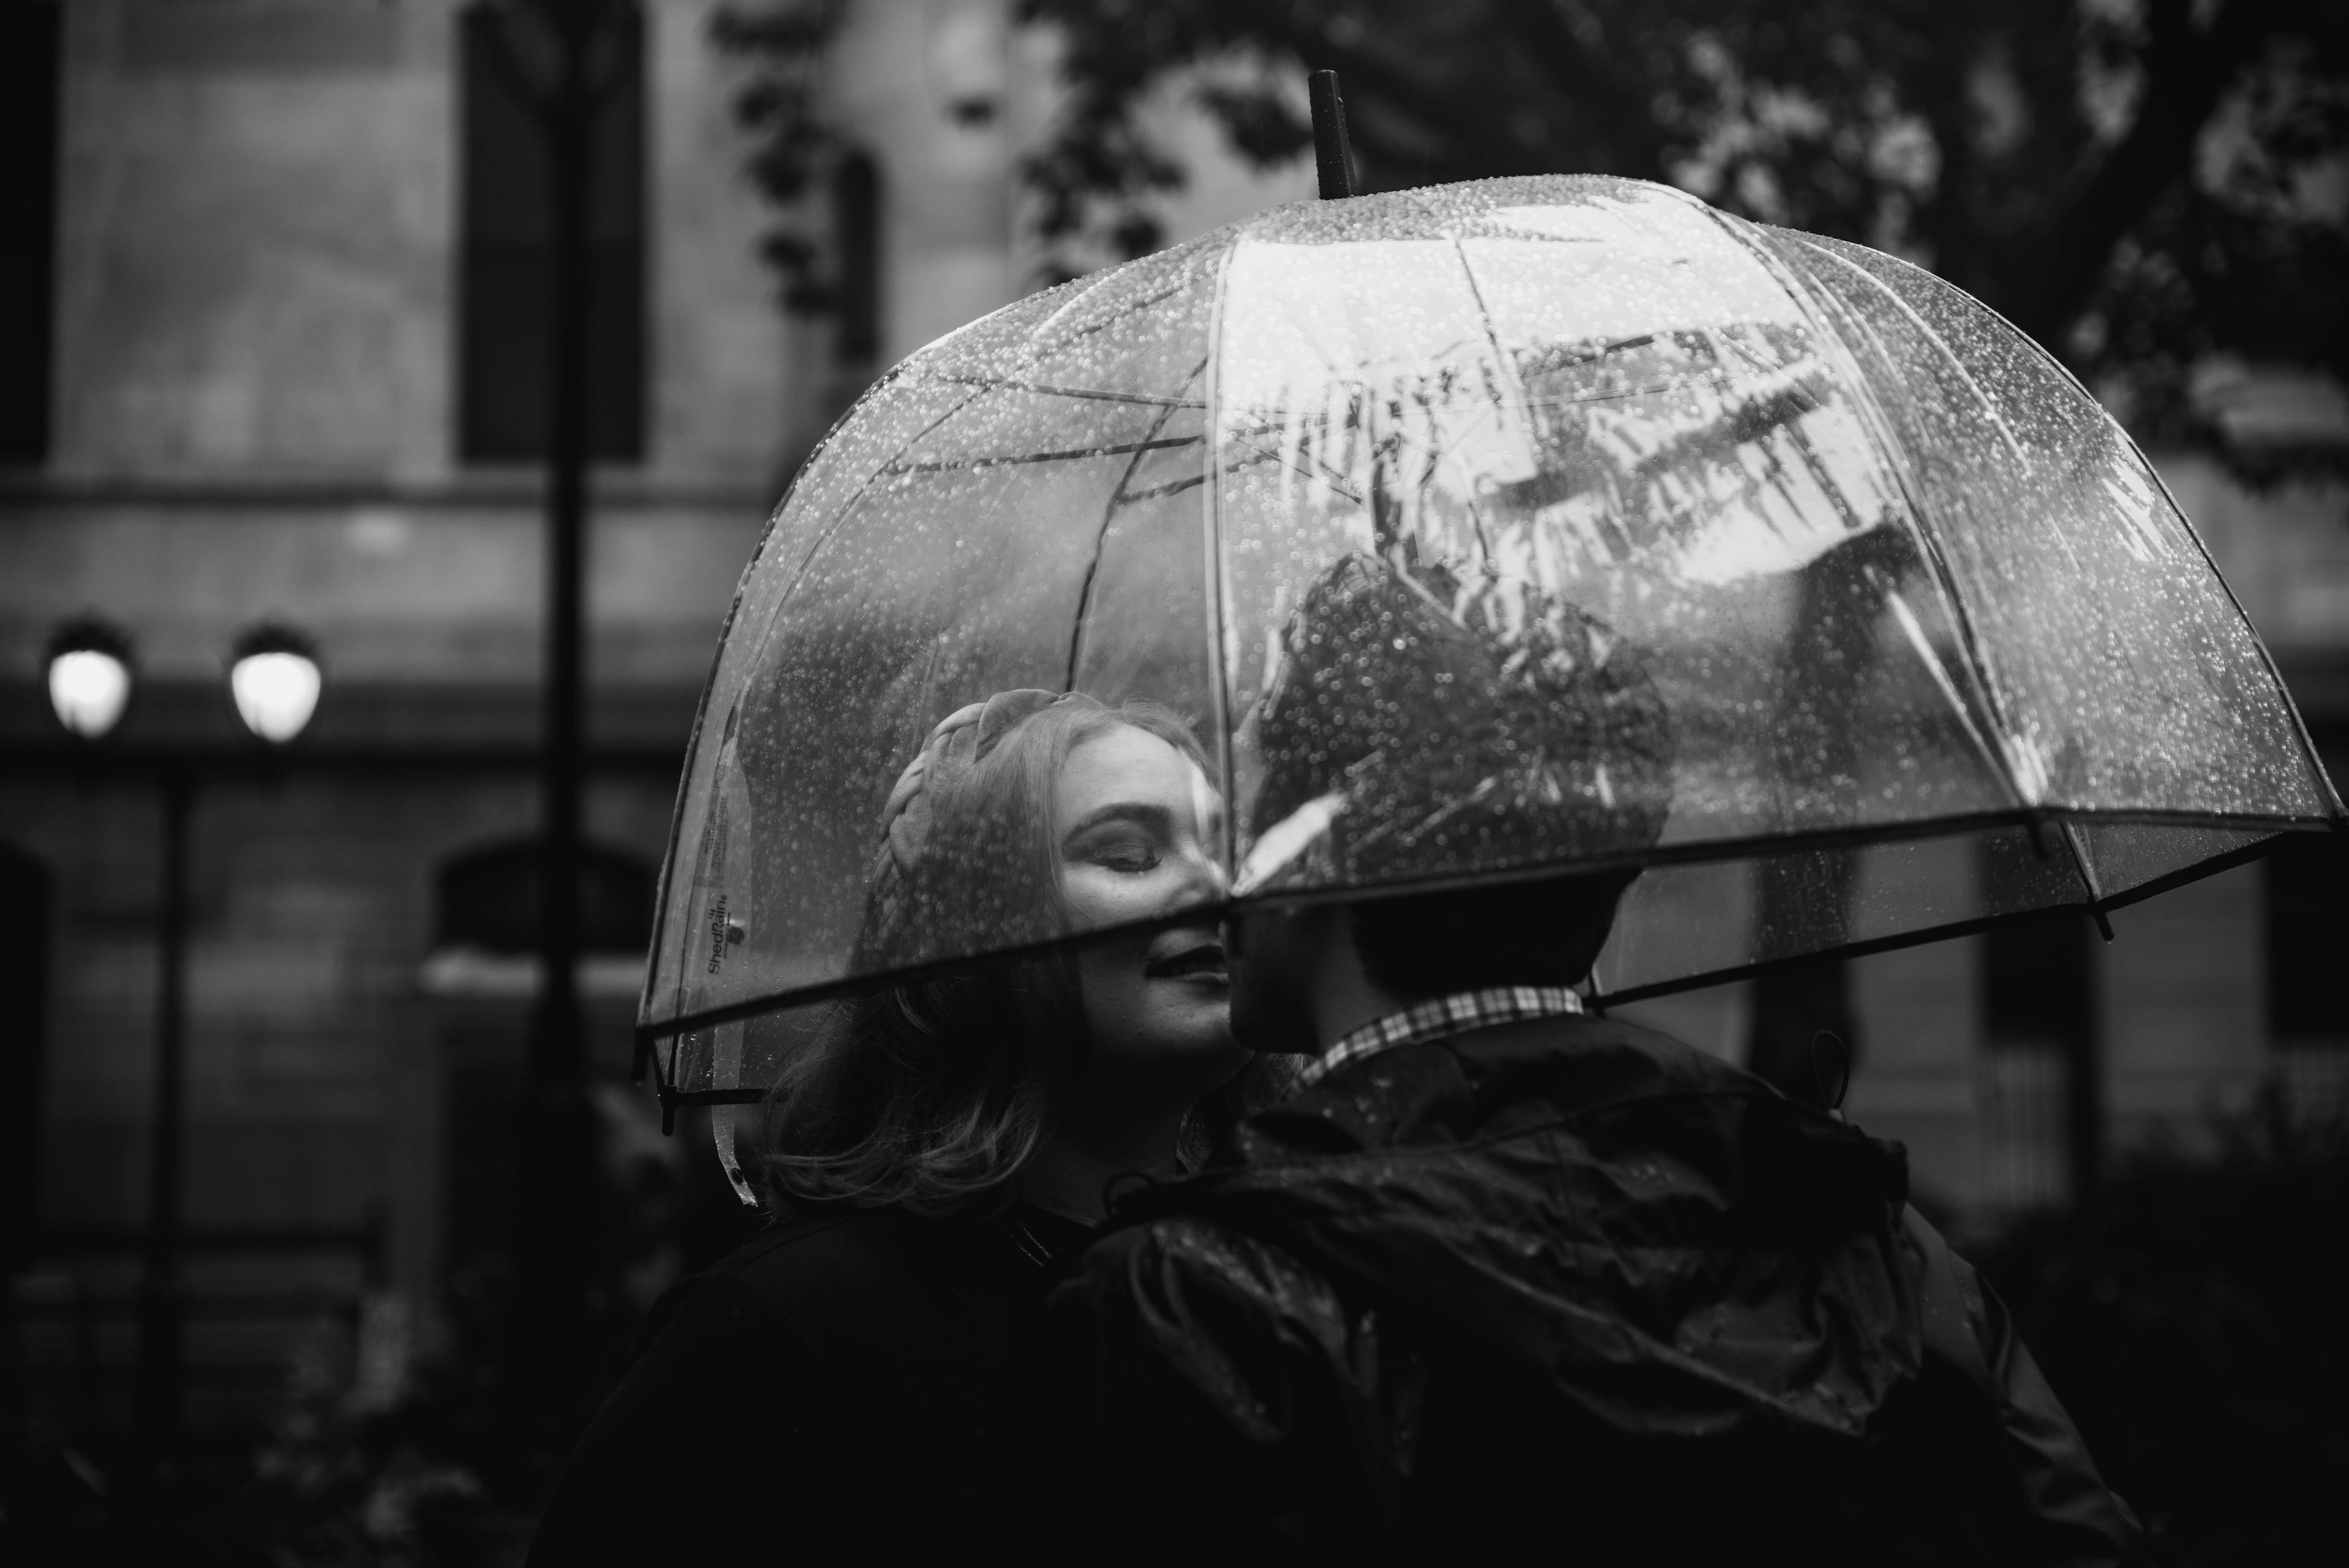 A couple embracing under a clear umbrella on a rainy day.